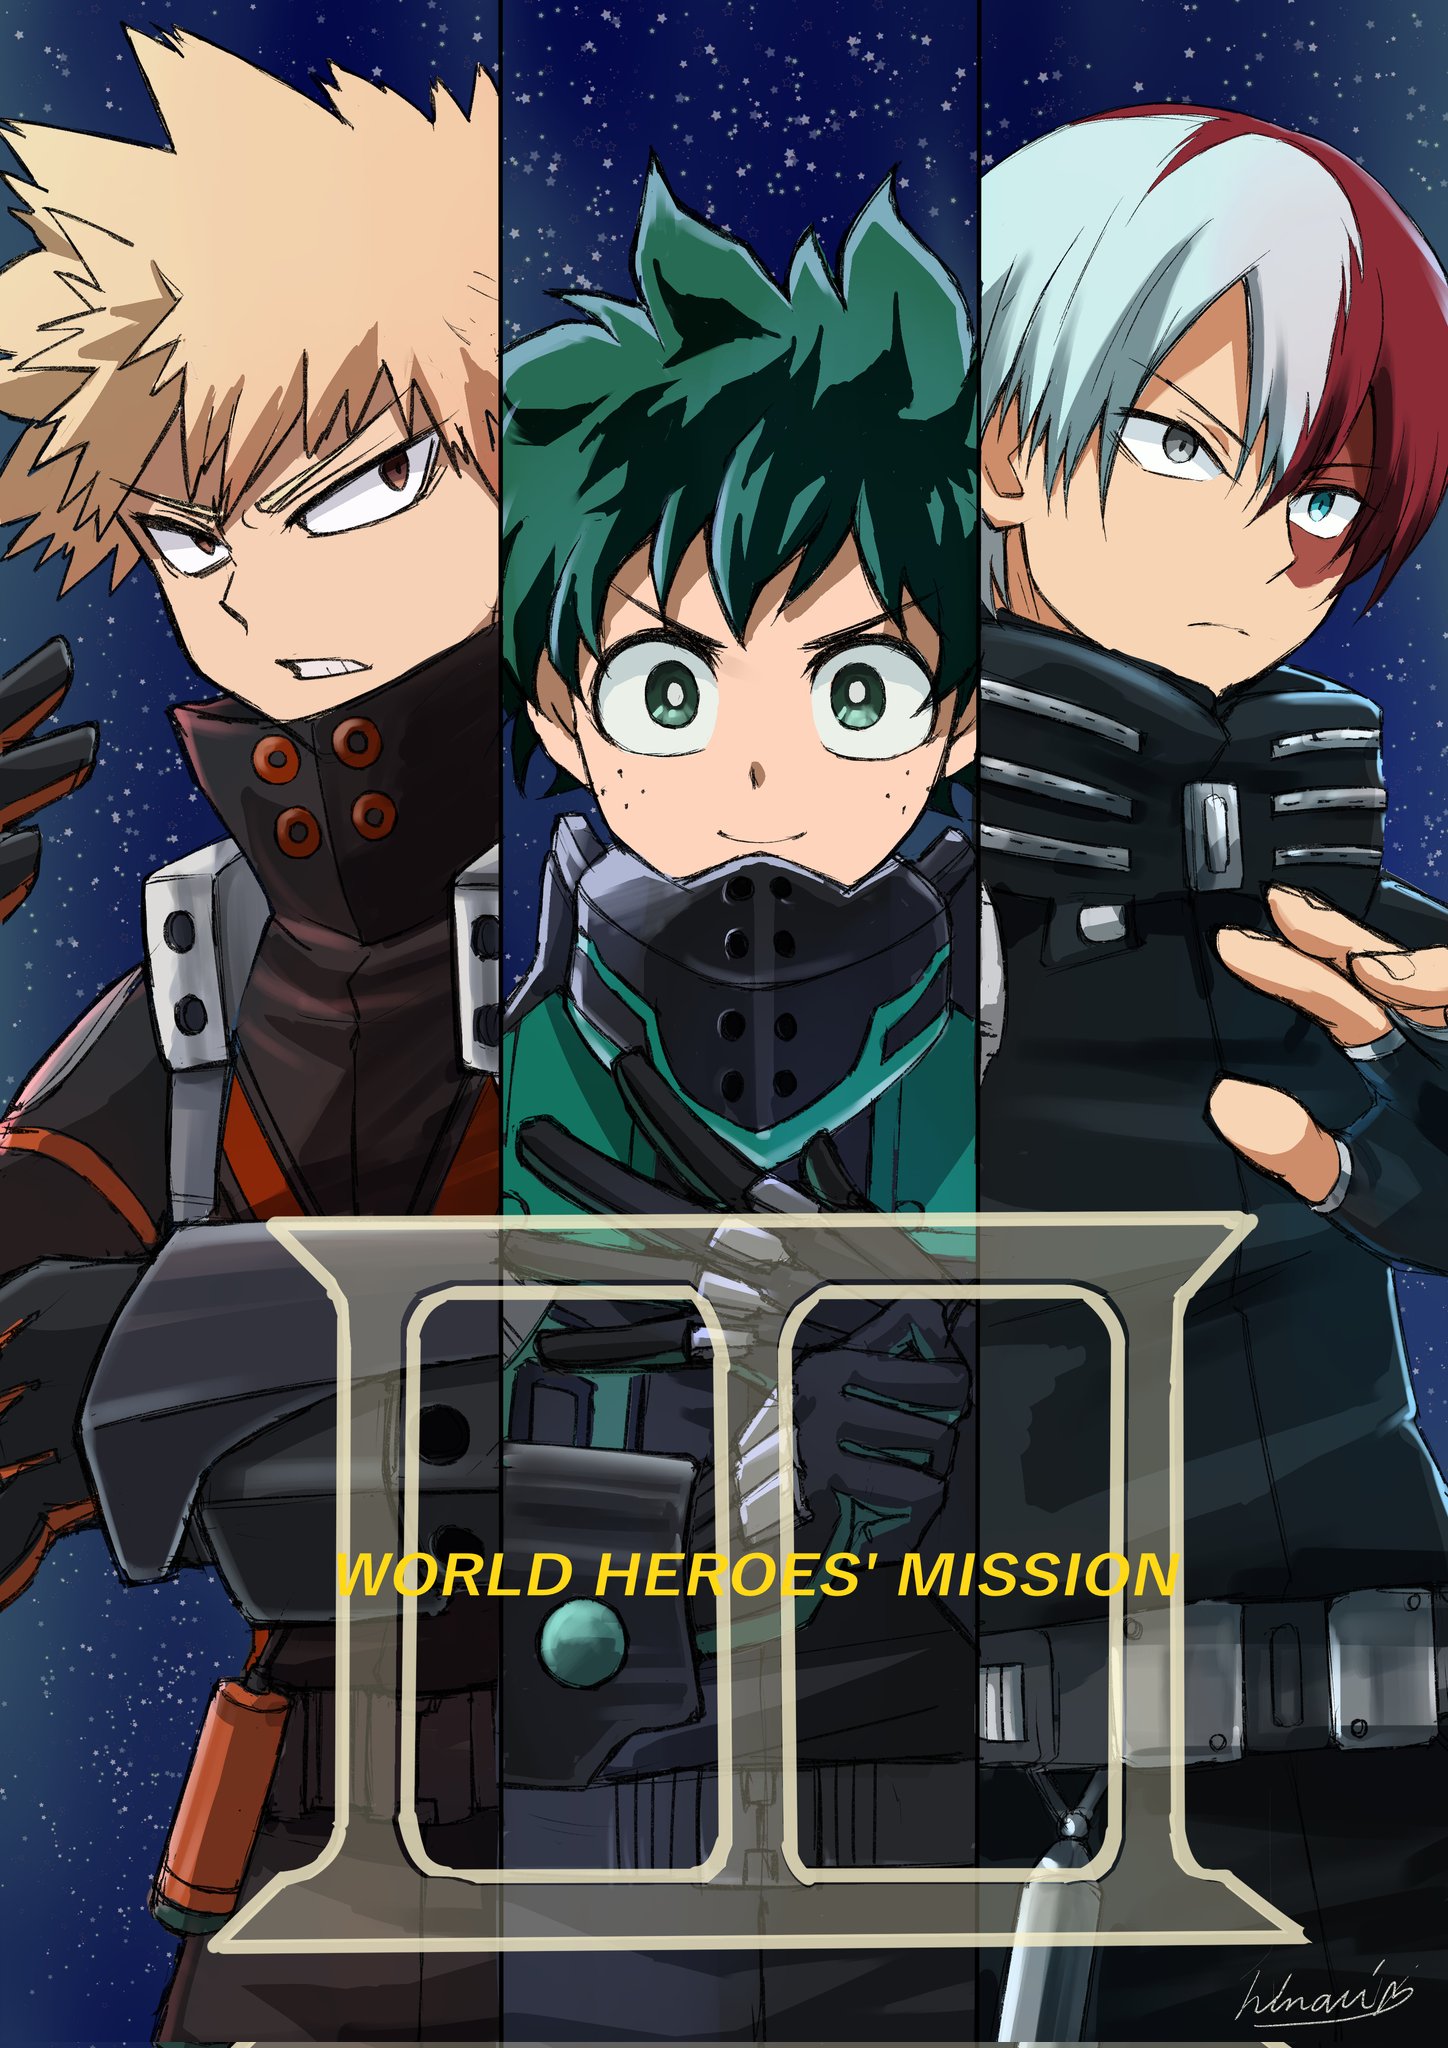 MHA World Heroes Mission Hype / Twitter